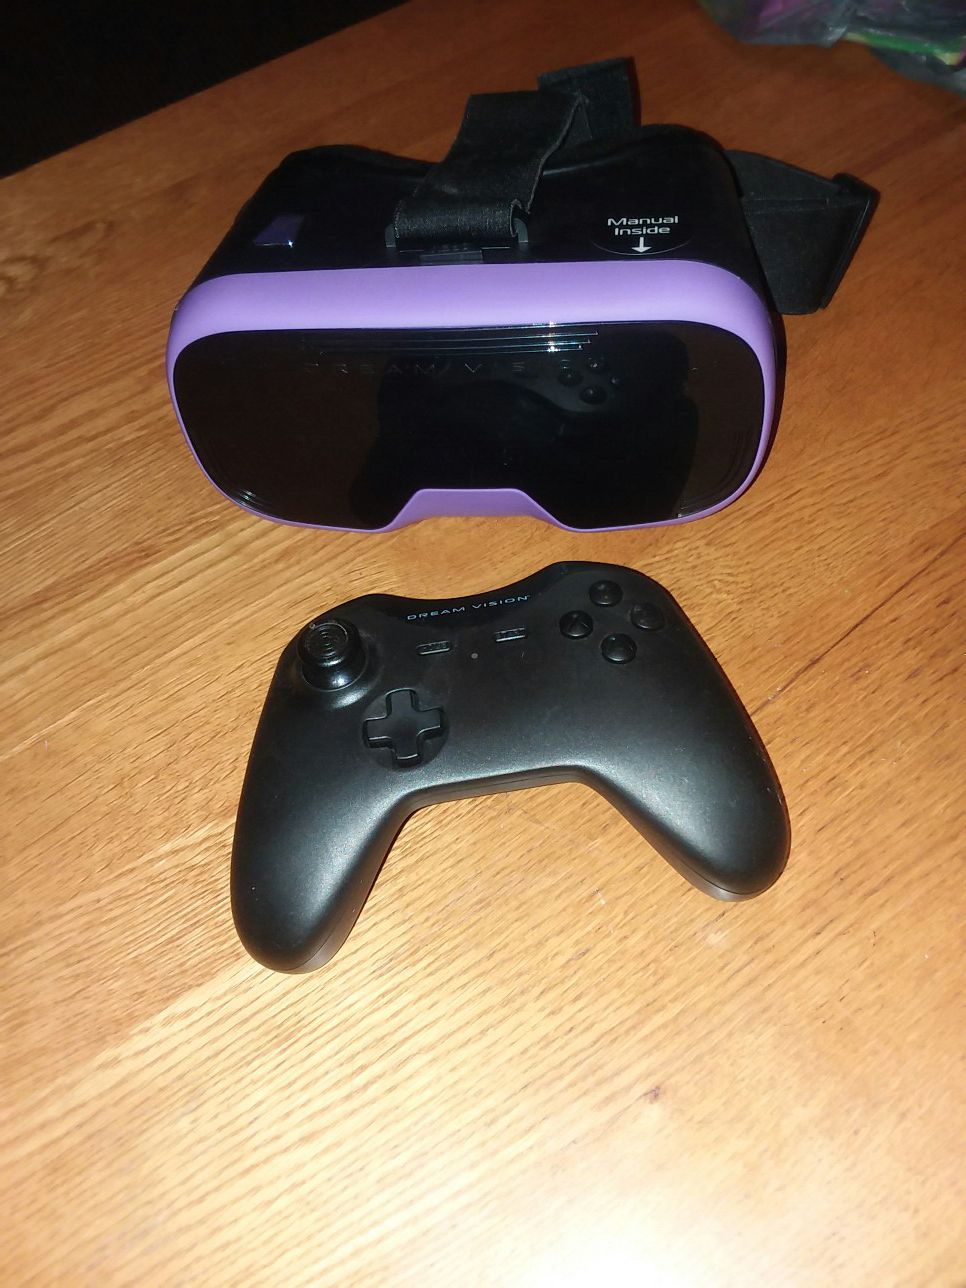 VR goggles and controller